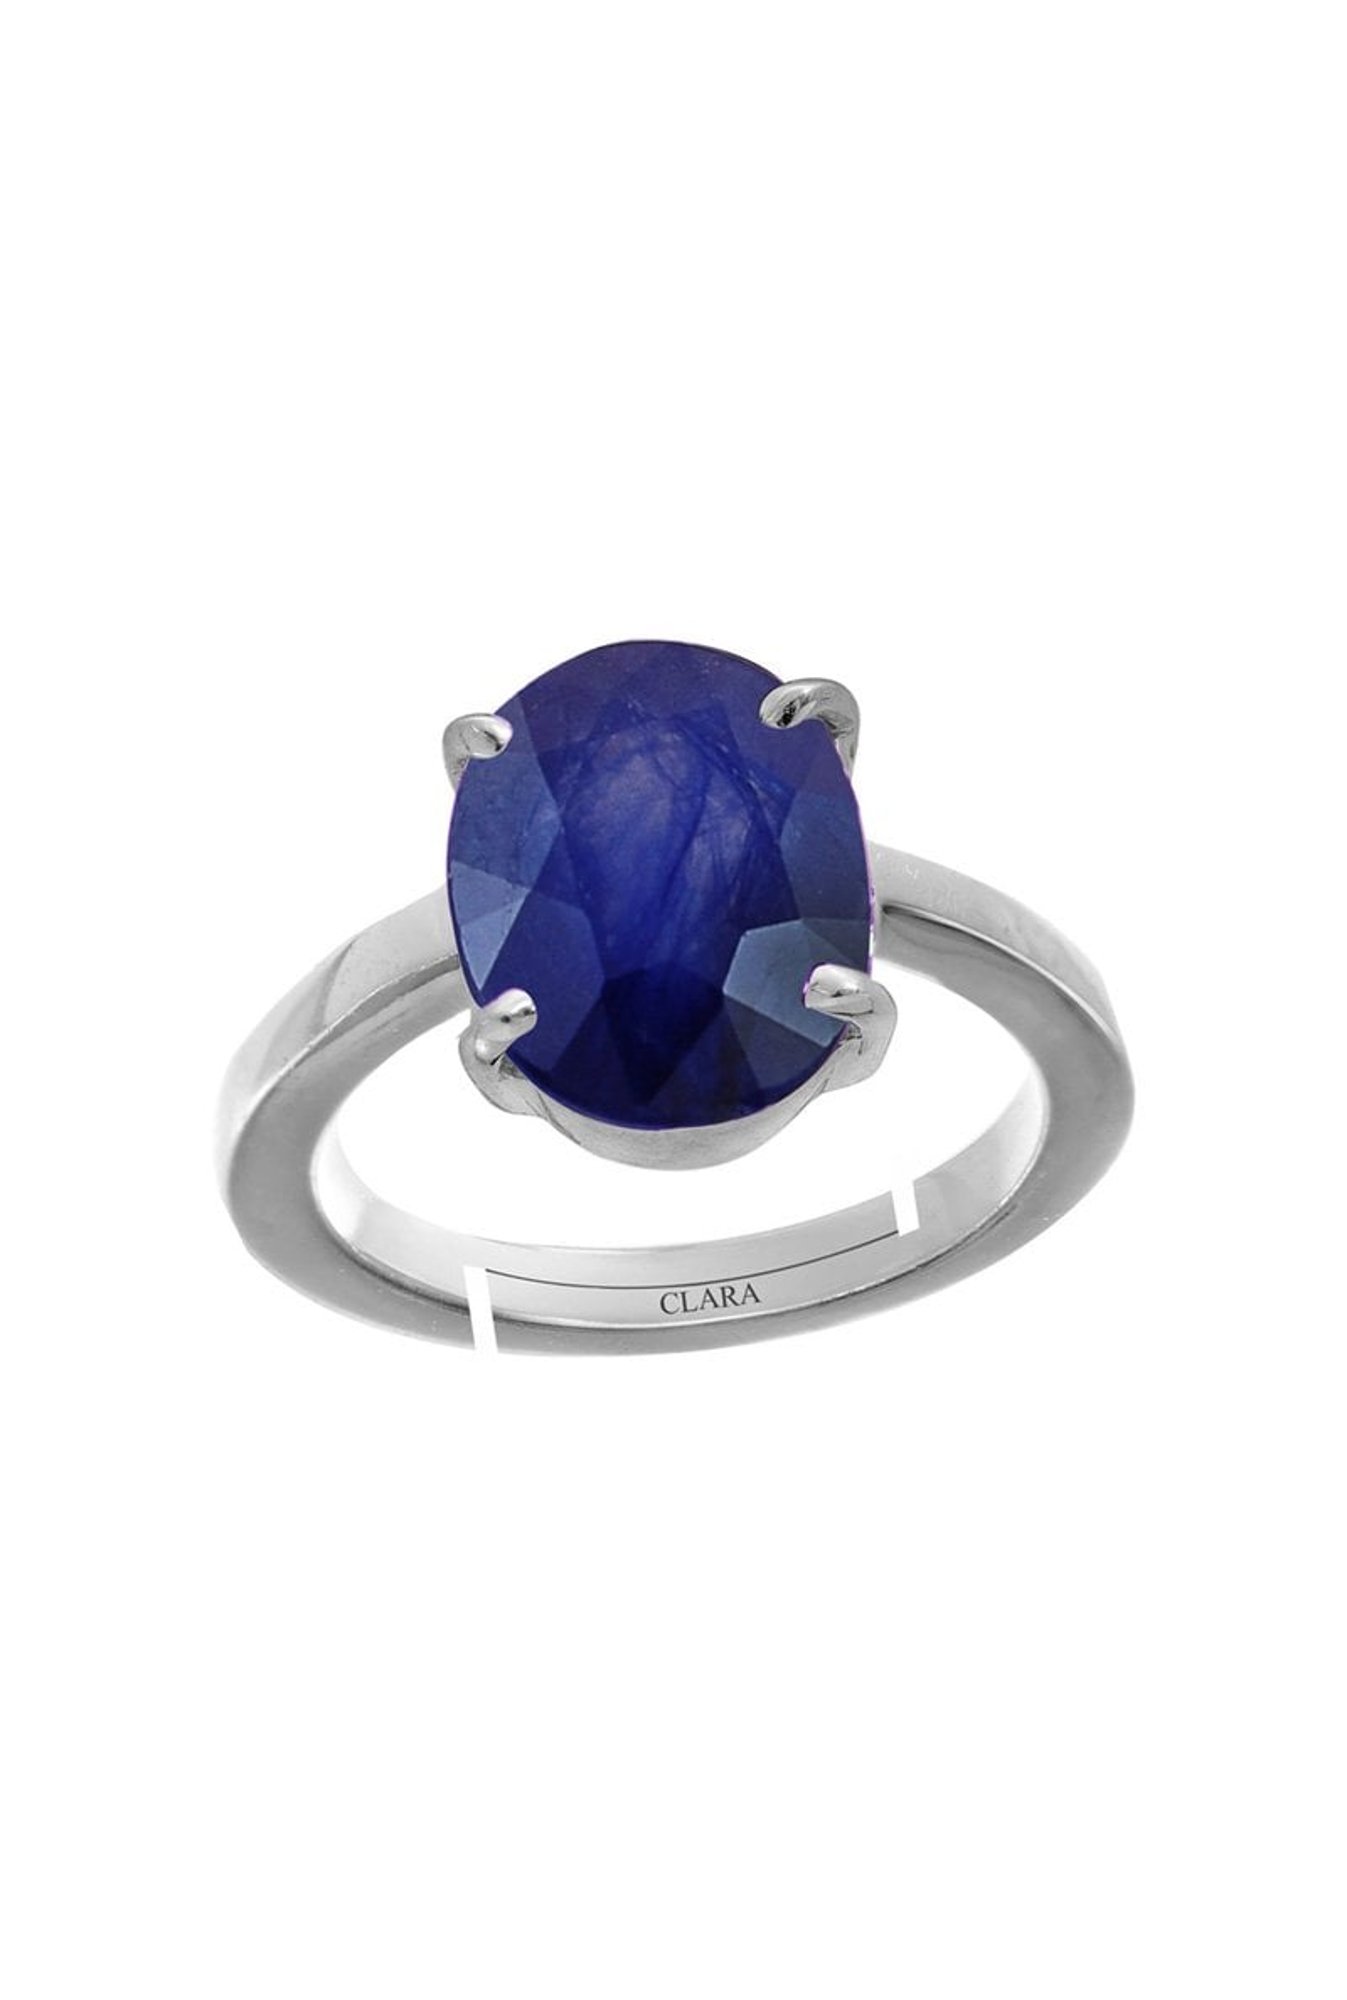 Buy Blue Sapphire Natural Certified Dark Blue Sapphire/neelam 4.00-11.00ct  Astrology Purpose Ring in Solid Sterling Silver 925 Gift for Lover Online  in India - Etsy